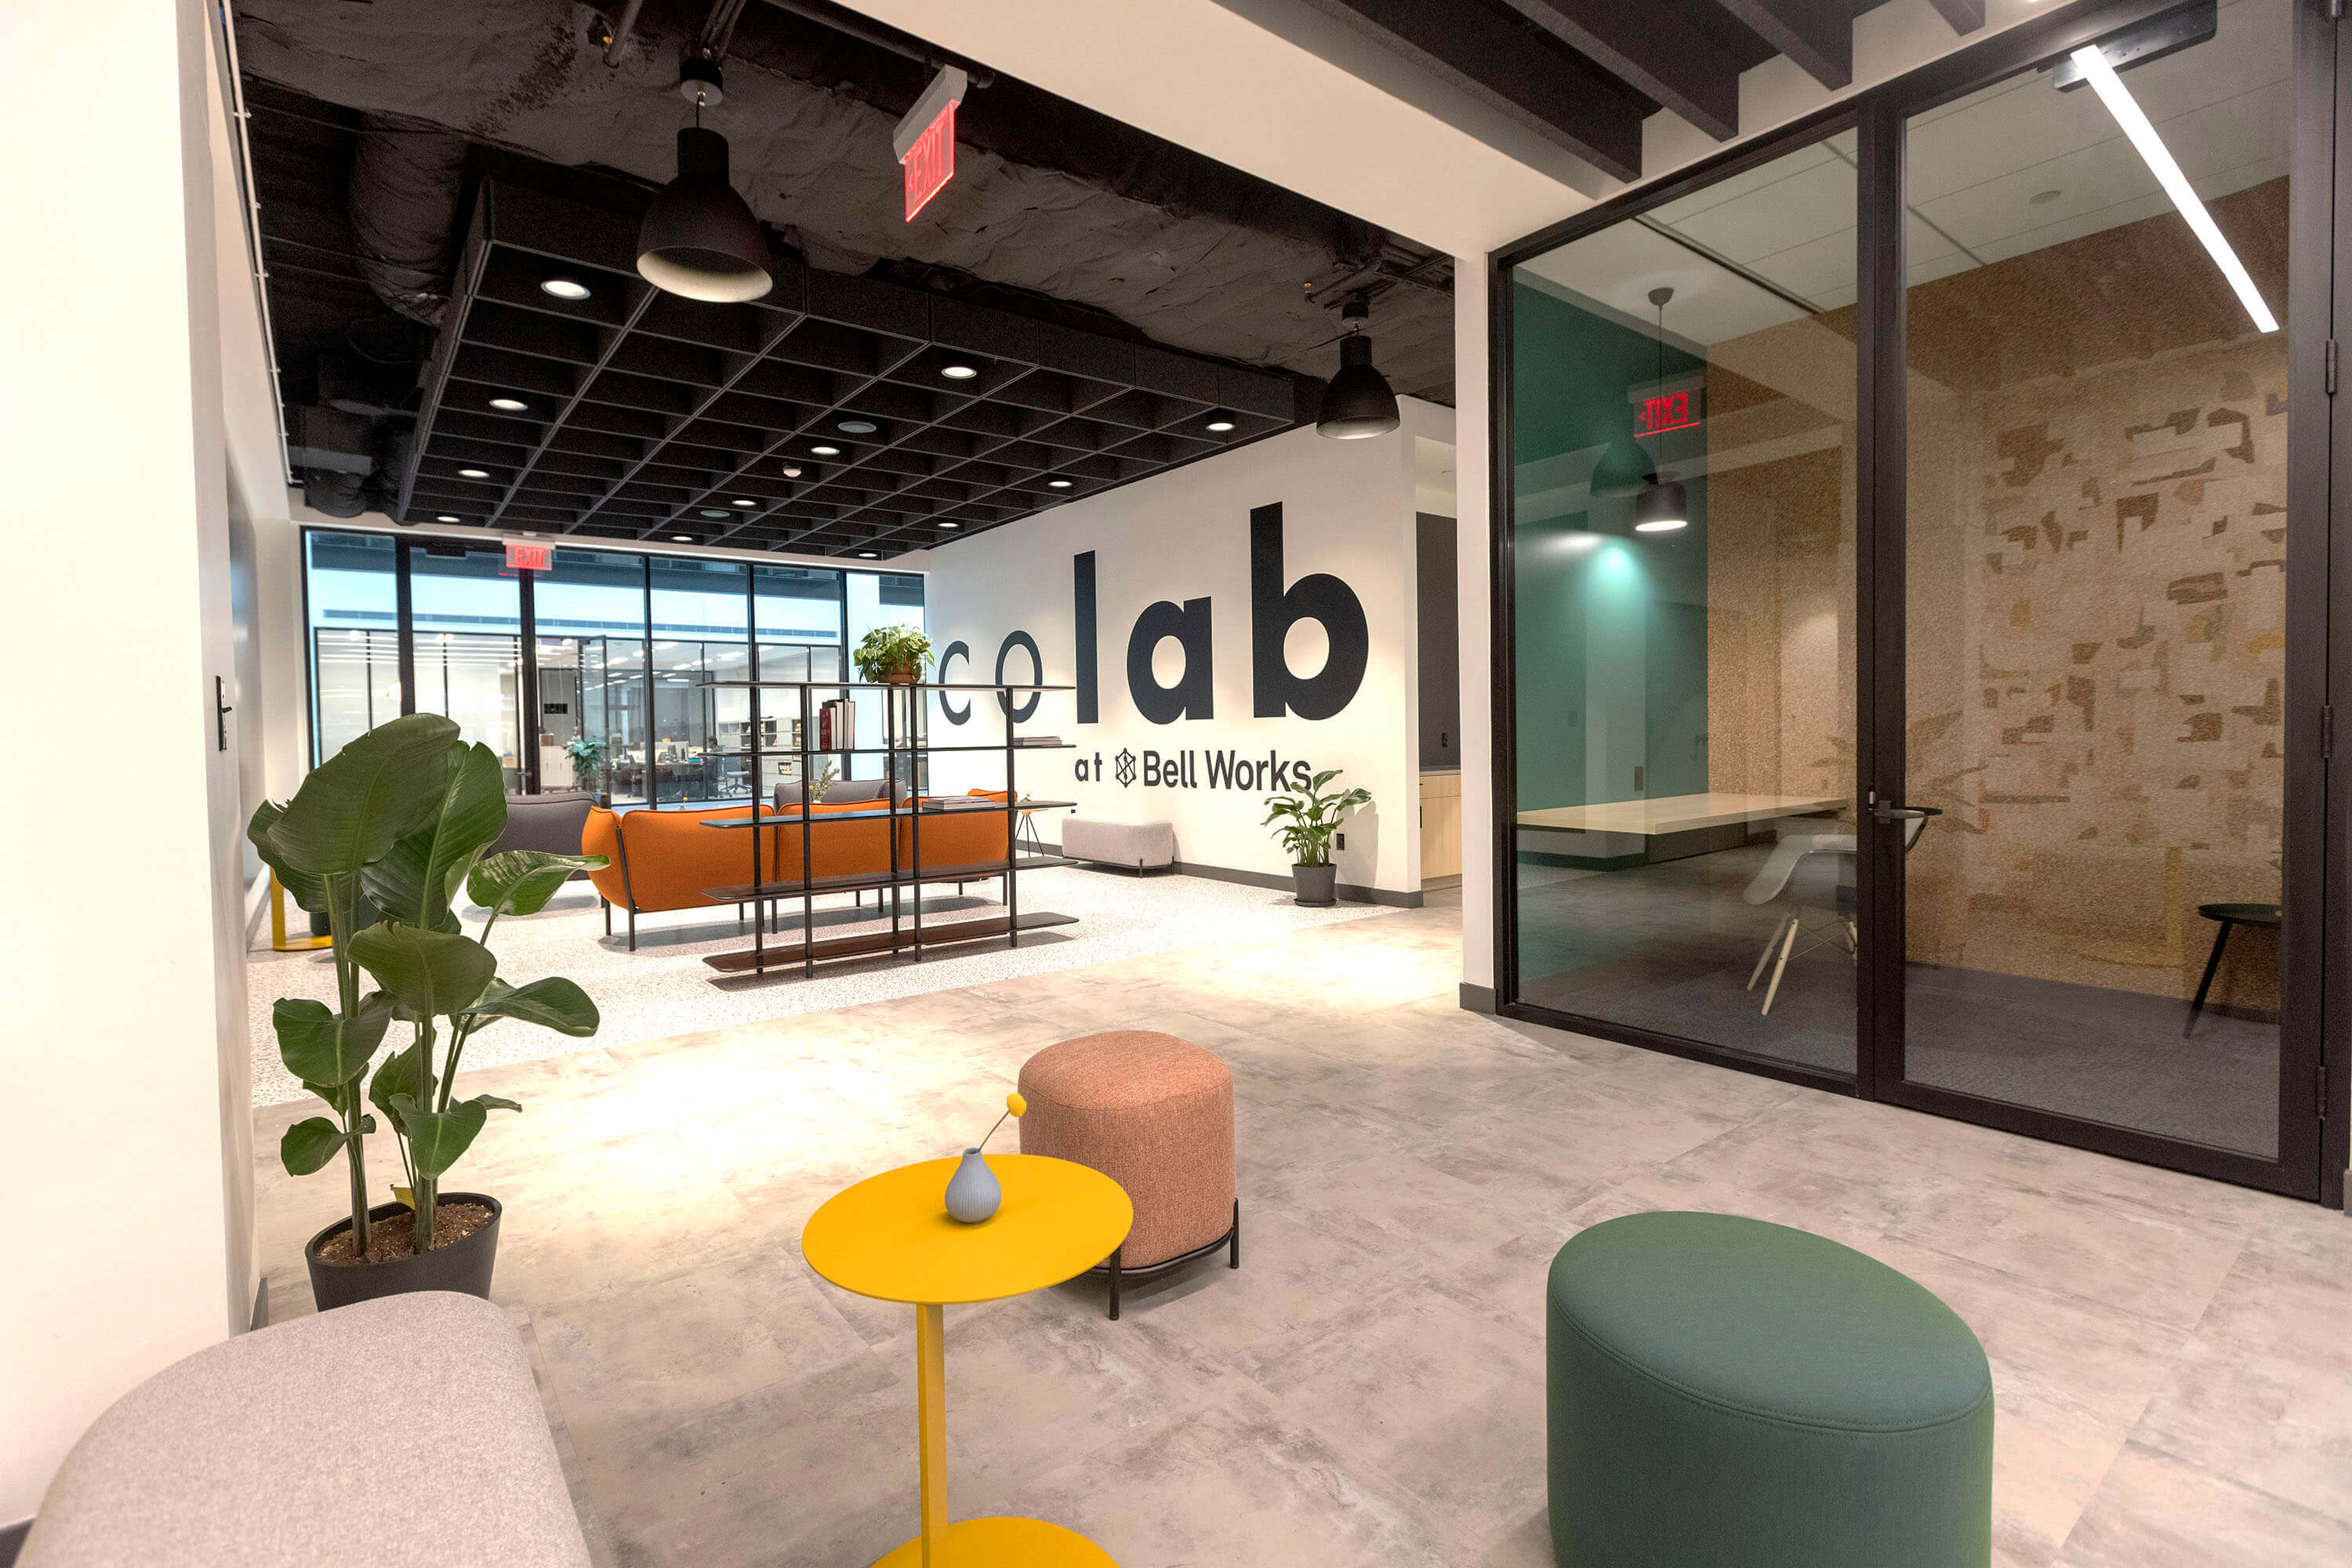 Bell Works Colab Coworking space